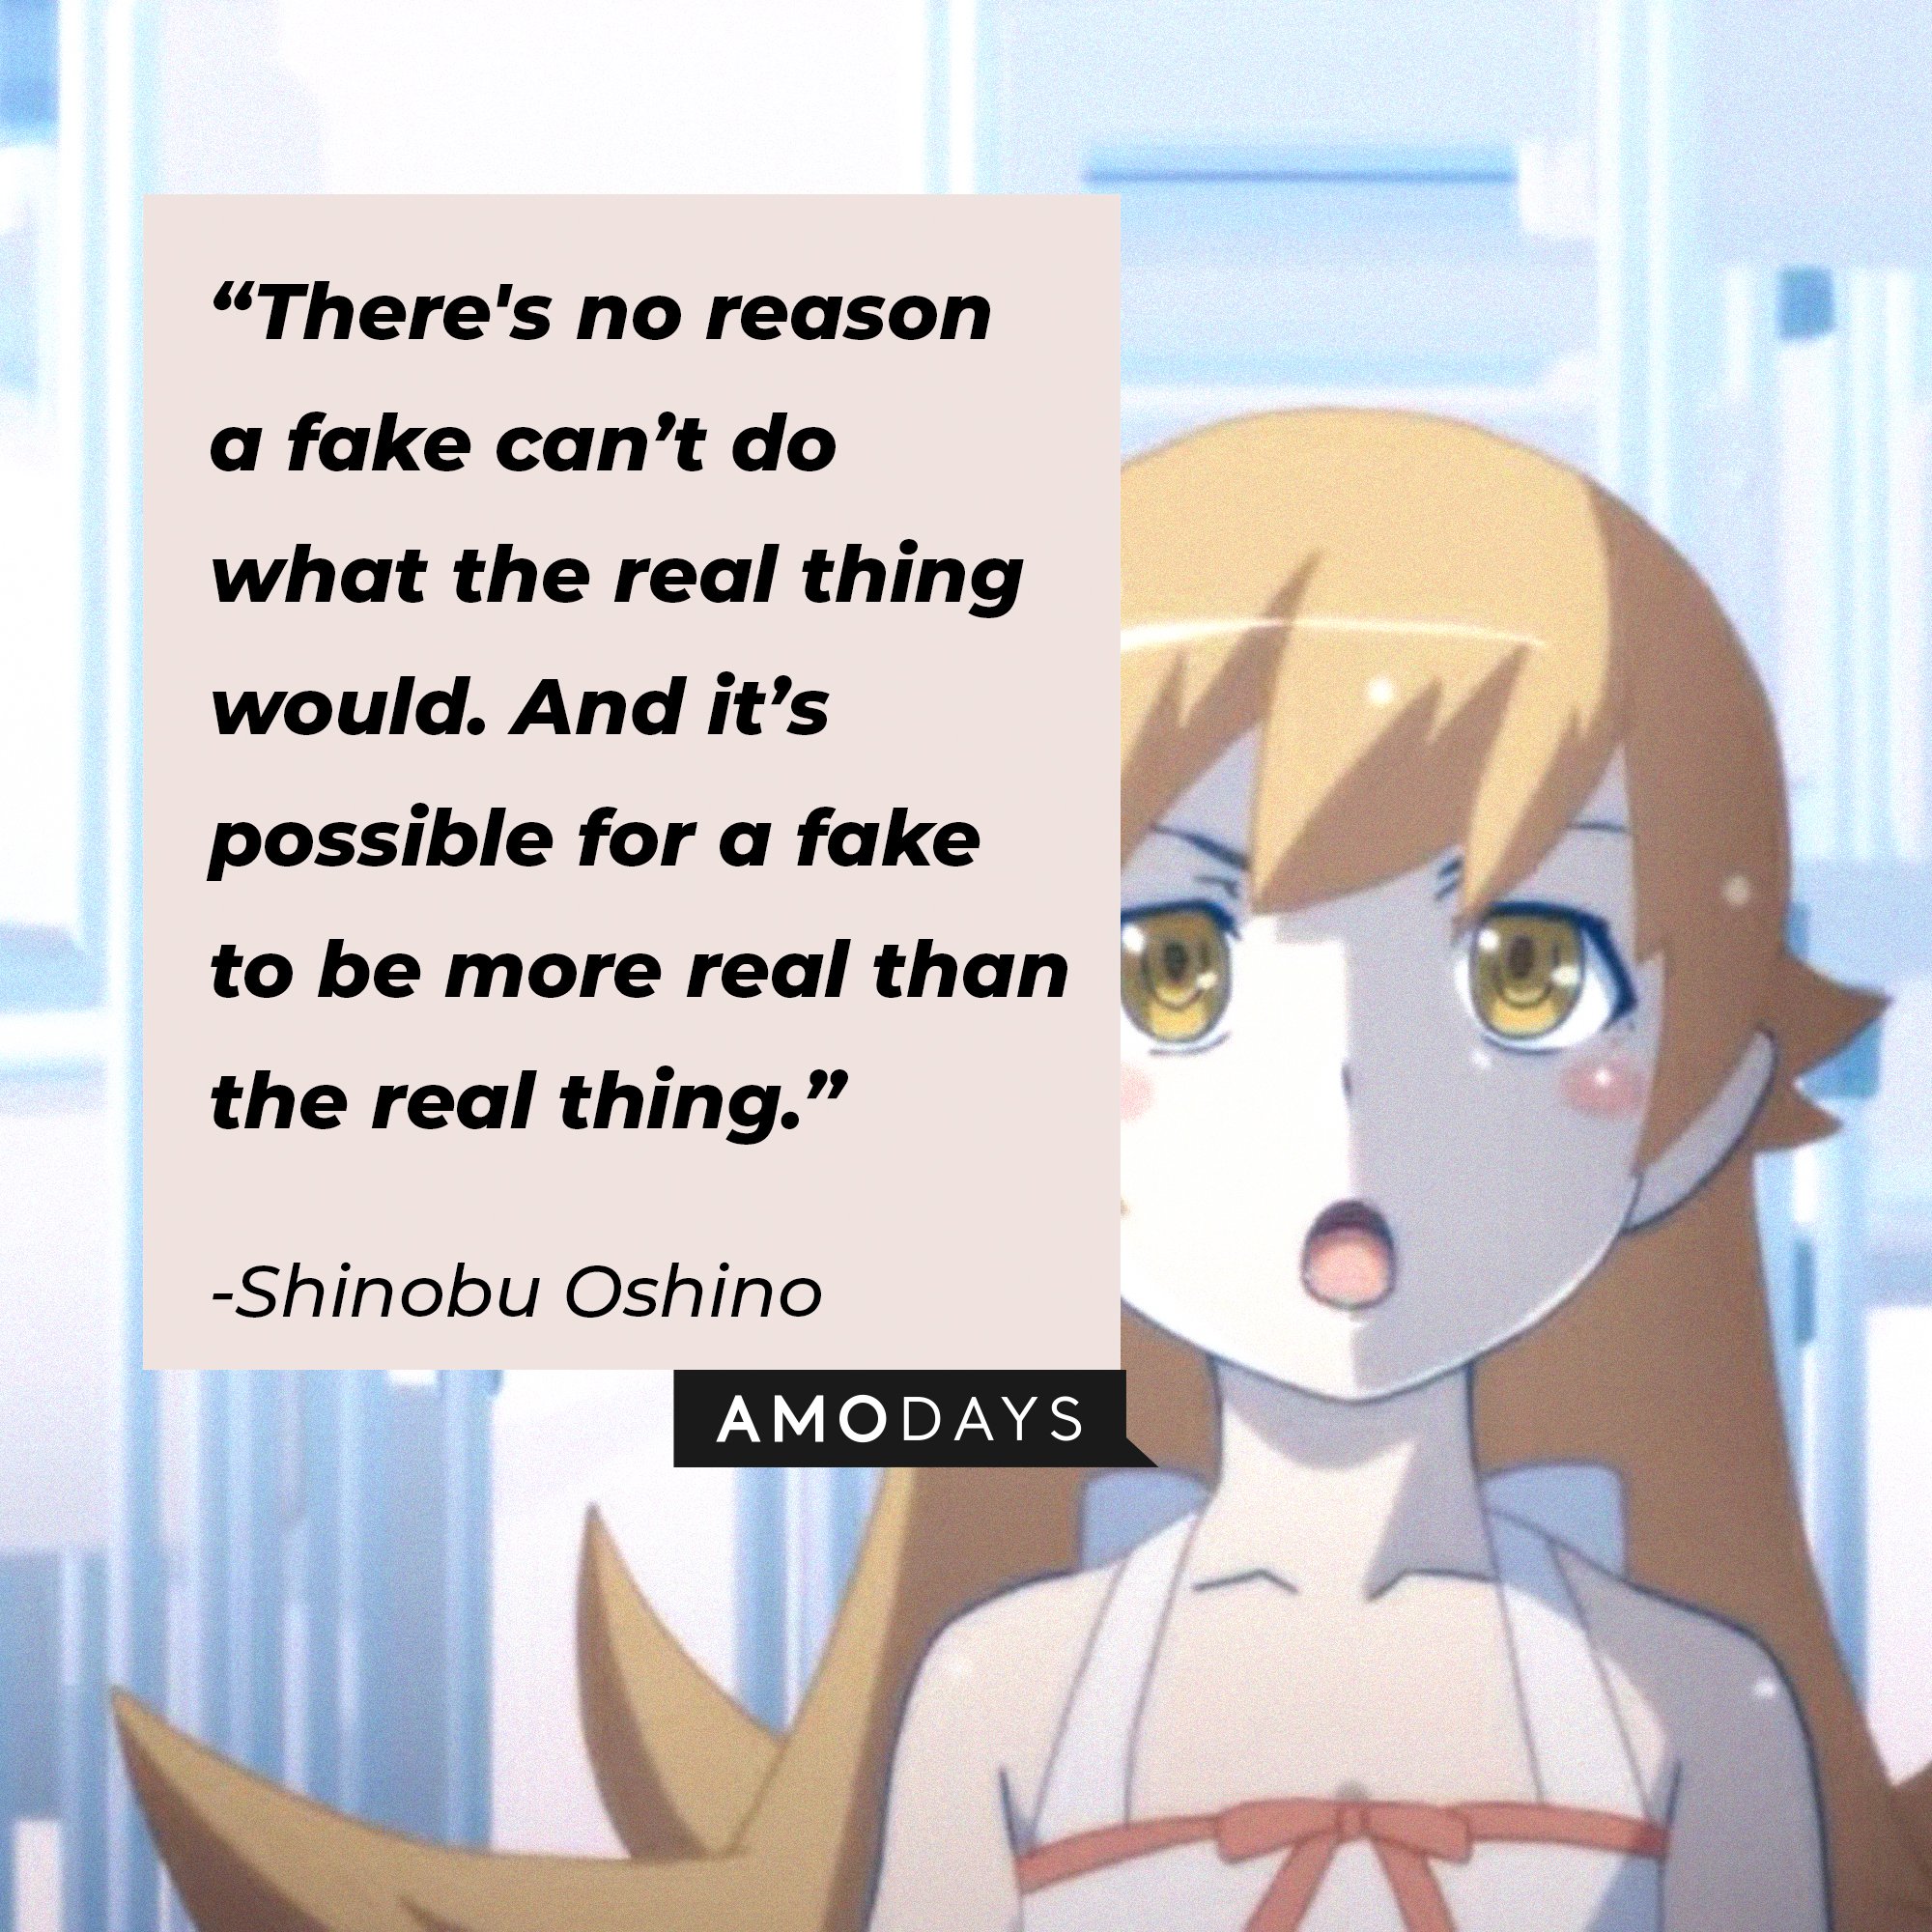 Shinobu Oshino’s quote: "There's no reason a fake can't do what the real thing would. And it's possible for a fake to be more real than the real thing." | Image: AmoDays 